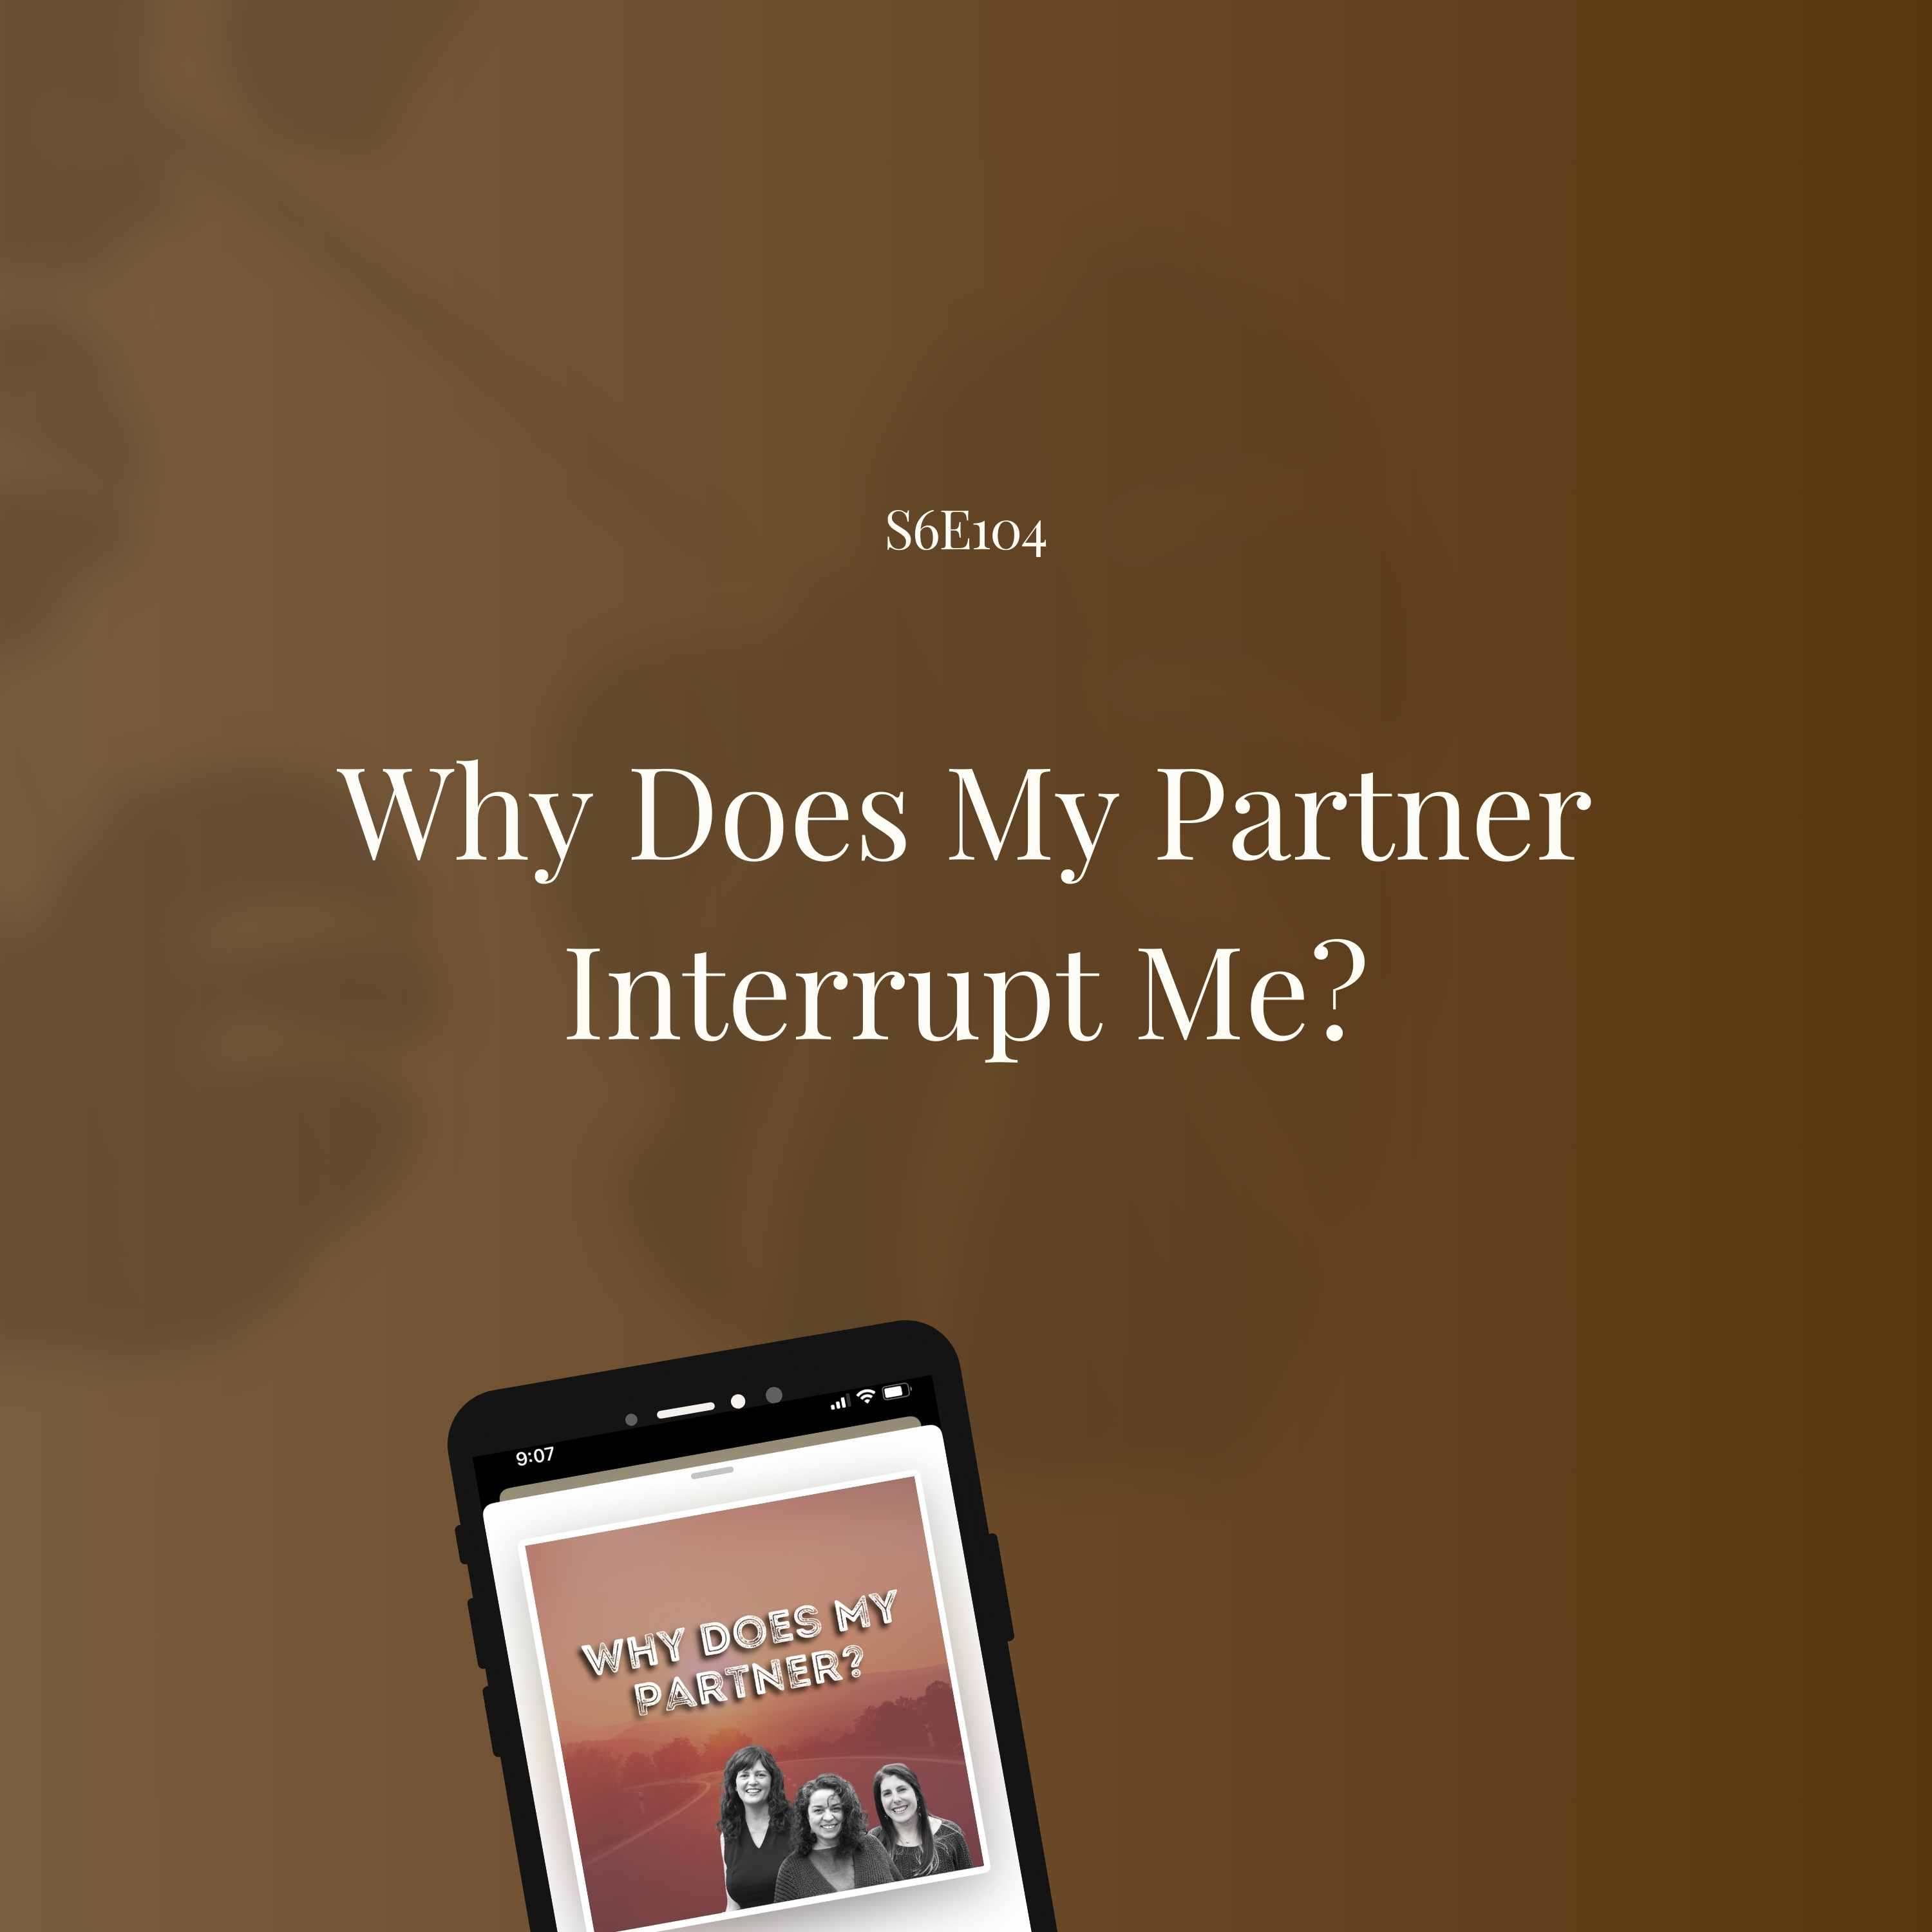 Why Does My Partner Interrupt Me?